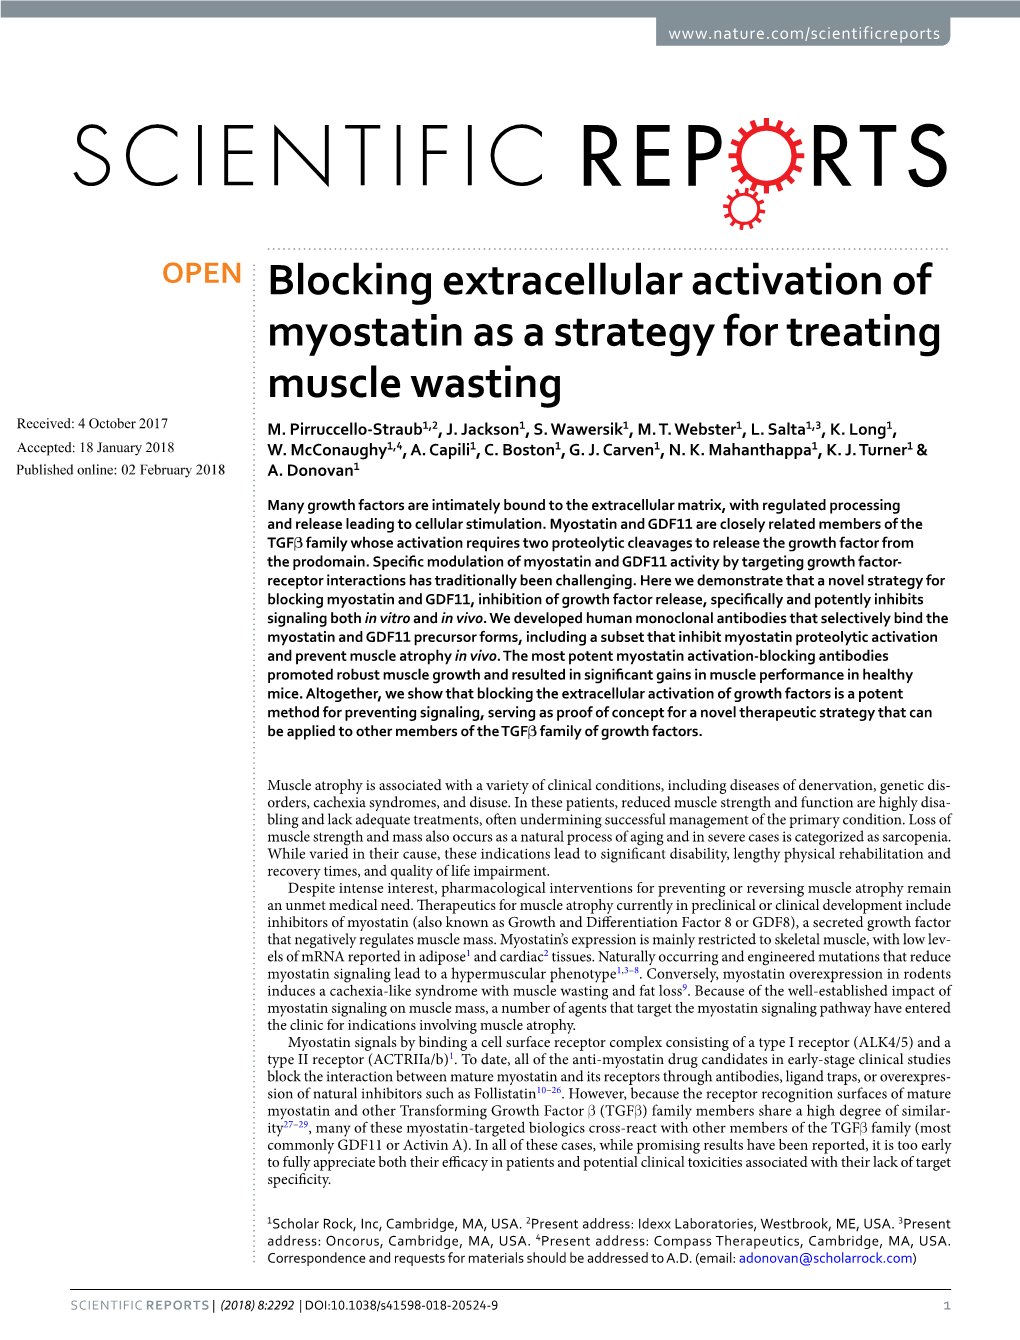 Blocking Extracellular Activation of Myostatin As a Strategy for Treating Muscle Wasting Received: 4 October 2017 M